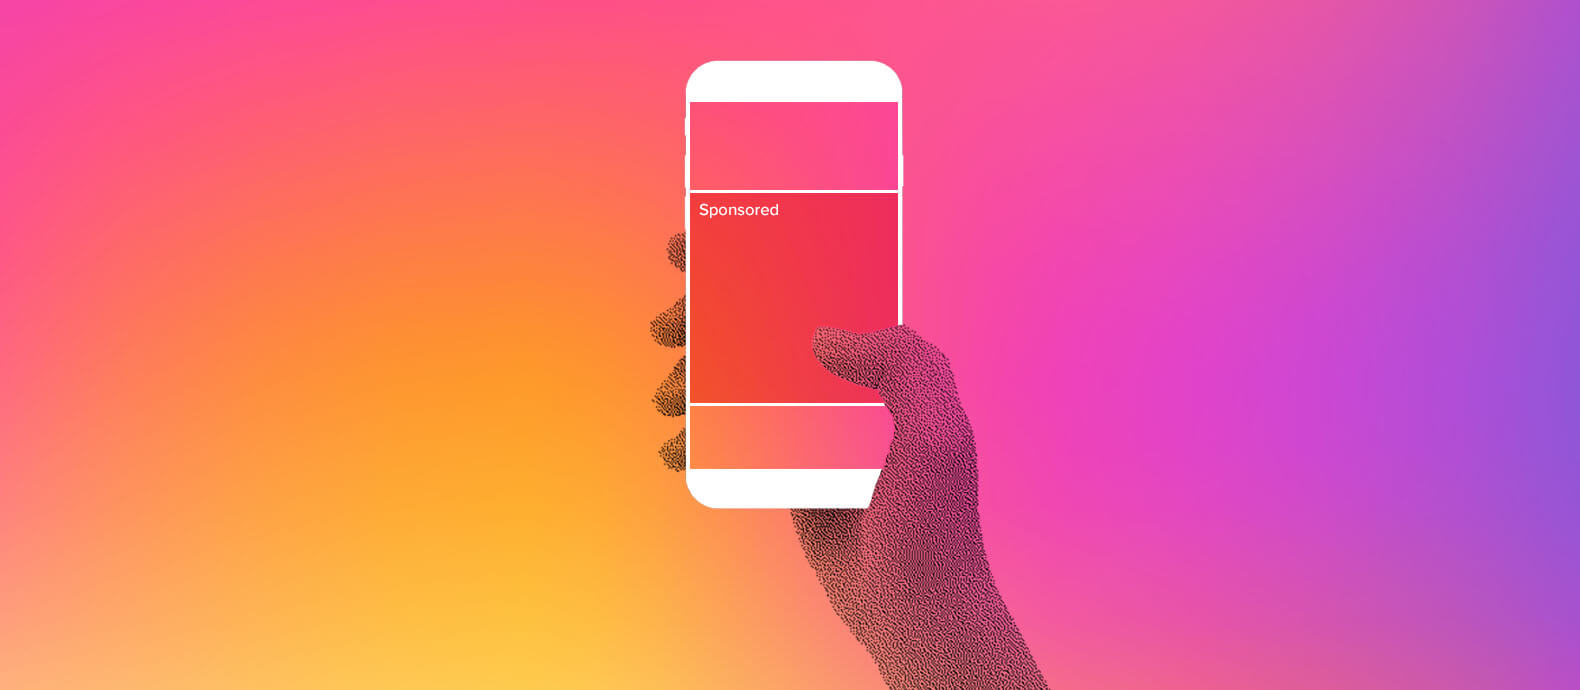 Instagram scam ads: how to protect your brand